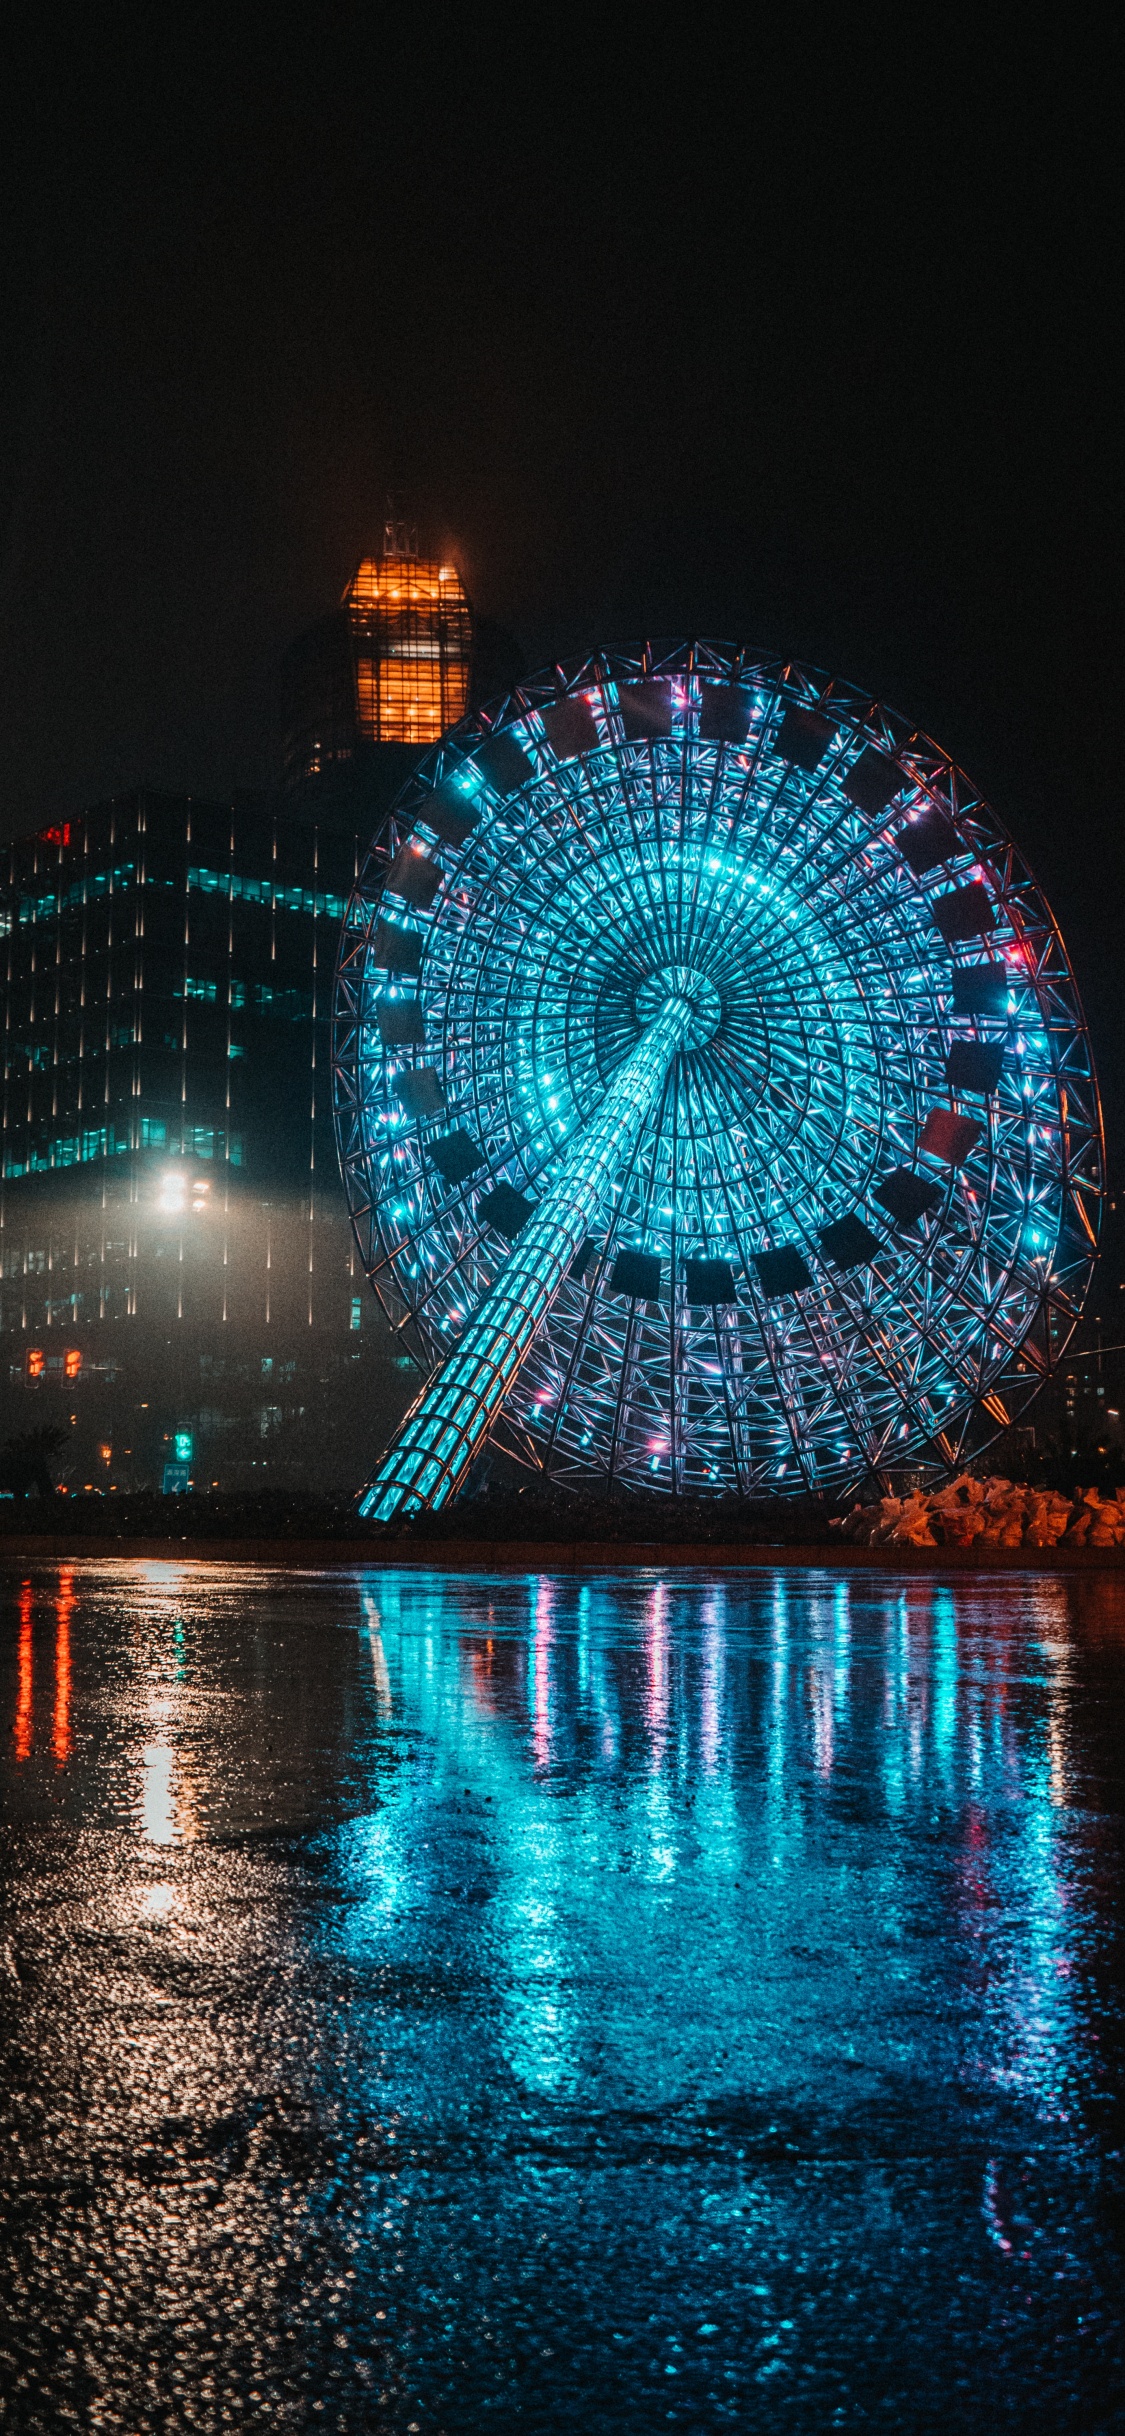 Blue and White Ferris Wheel During Night Time. Wallpaper in 1125x2436 Resolution